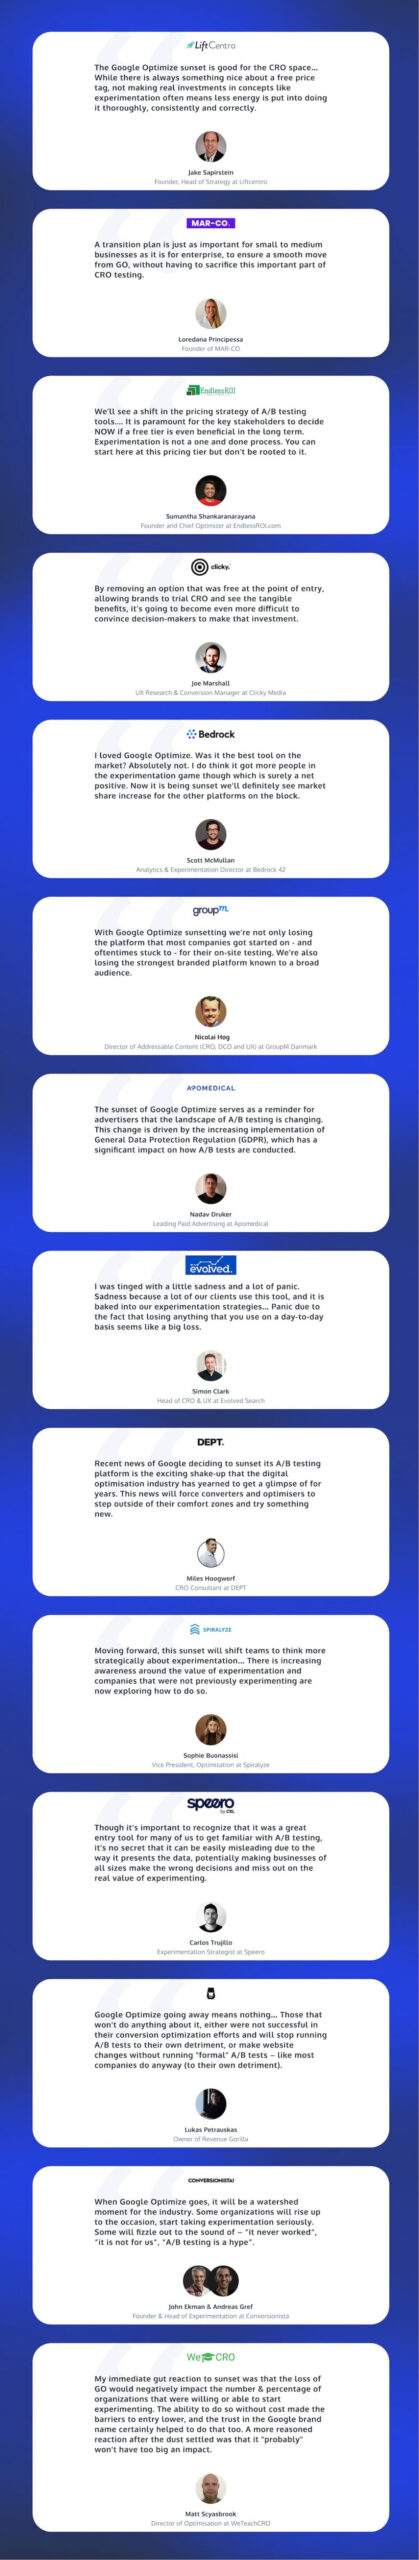 15 Experts Quotes Infographic